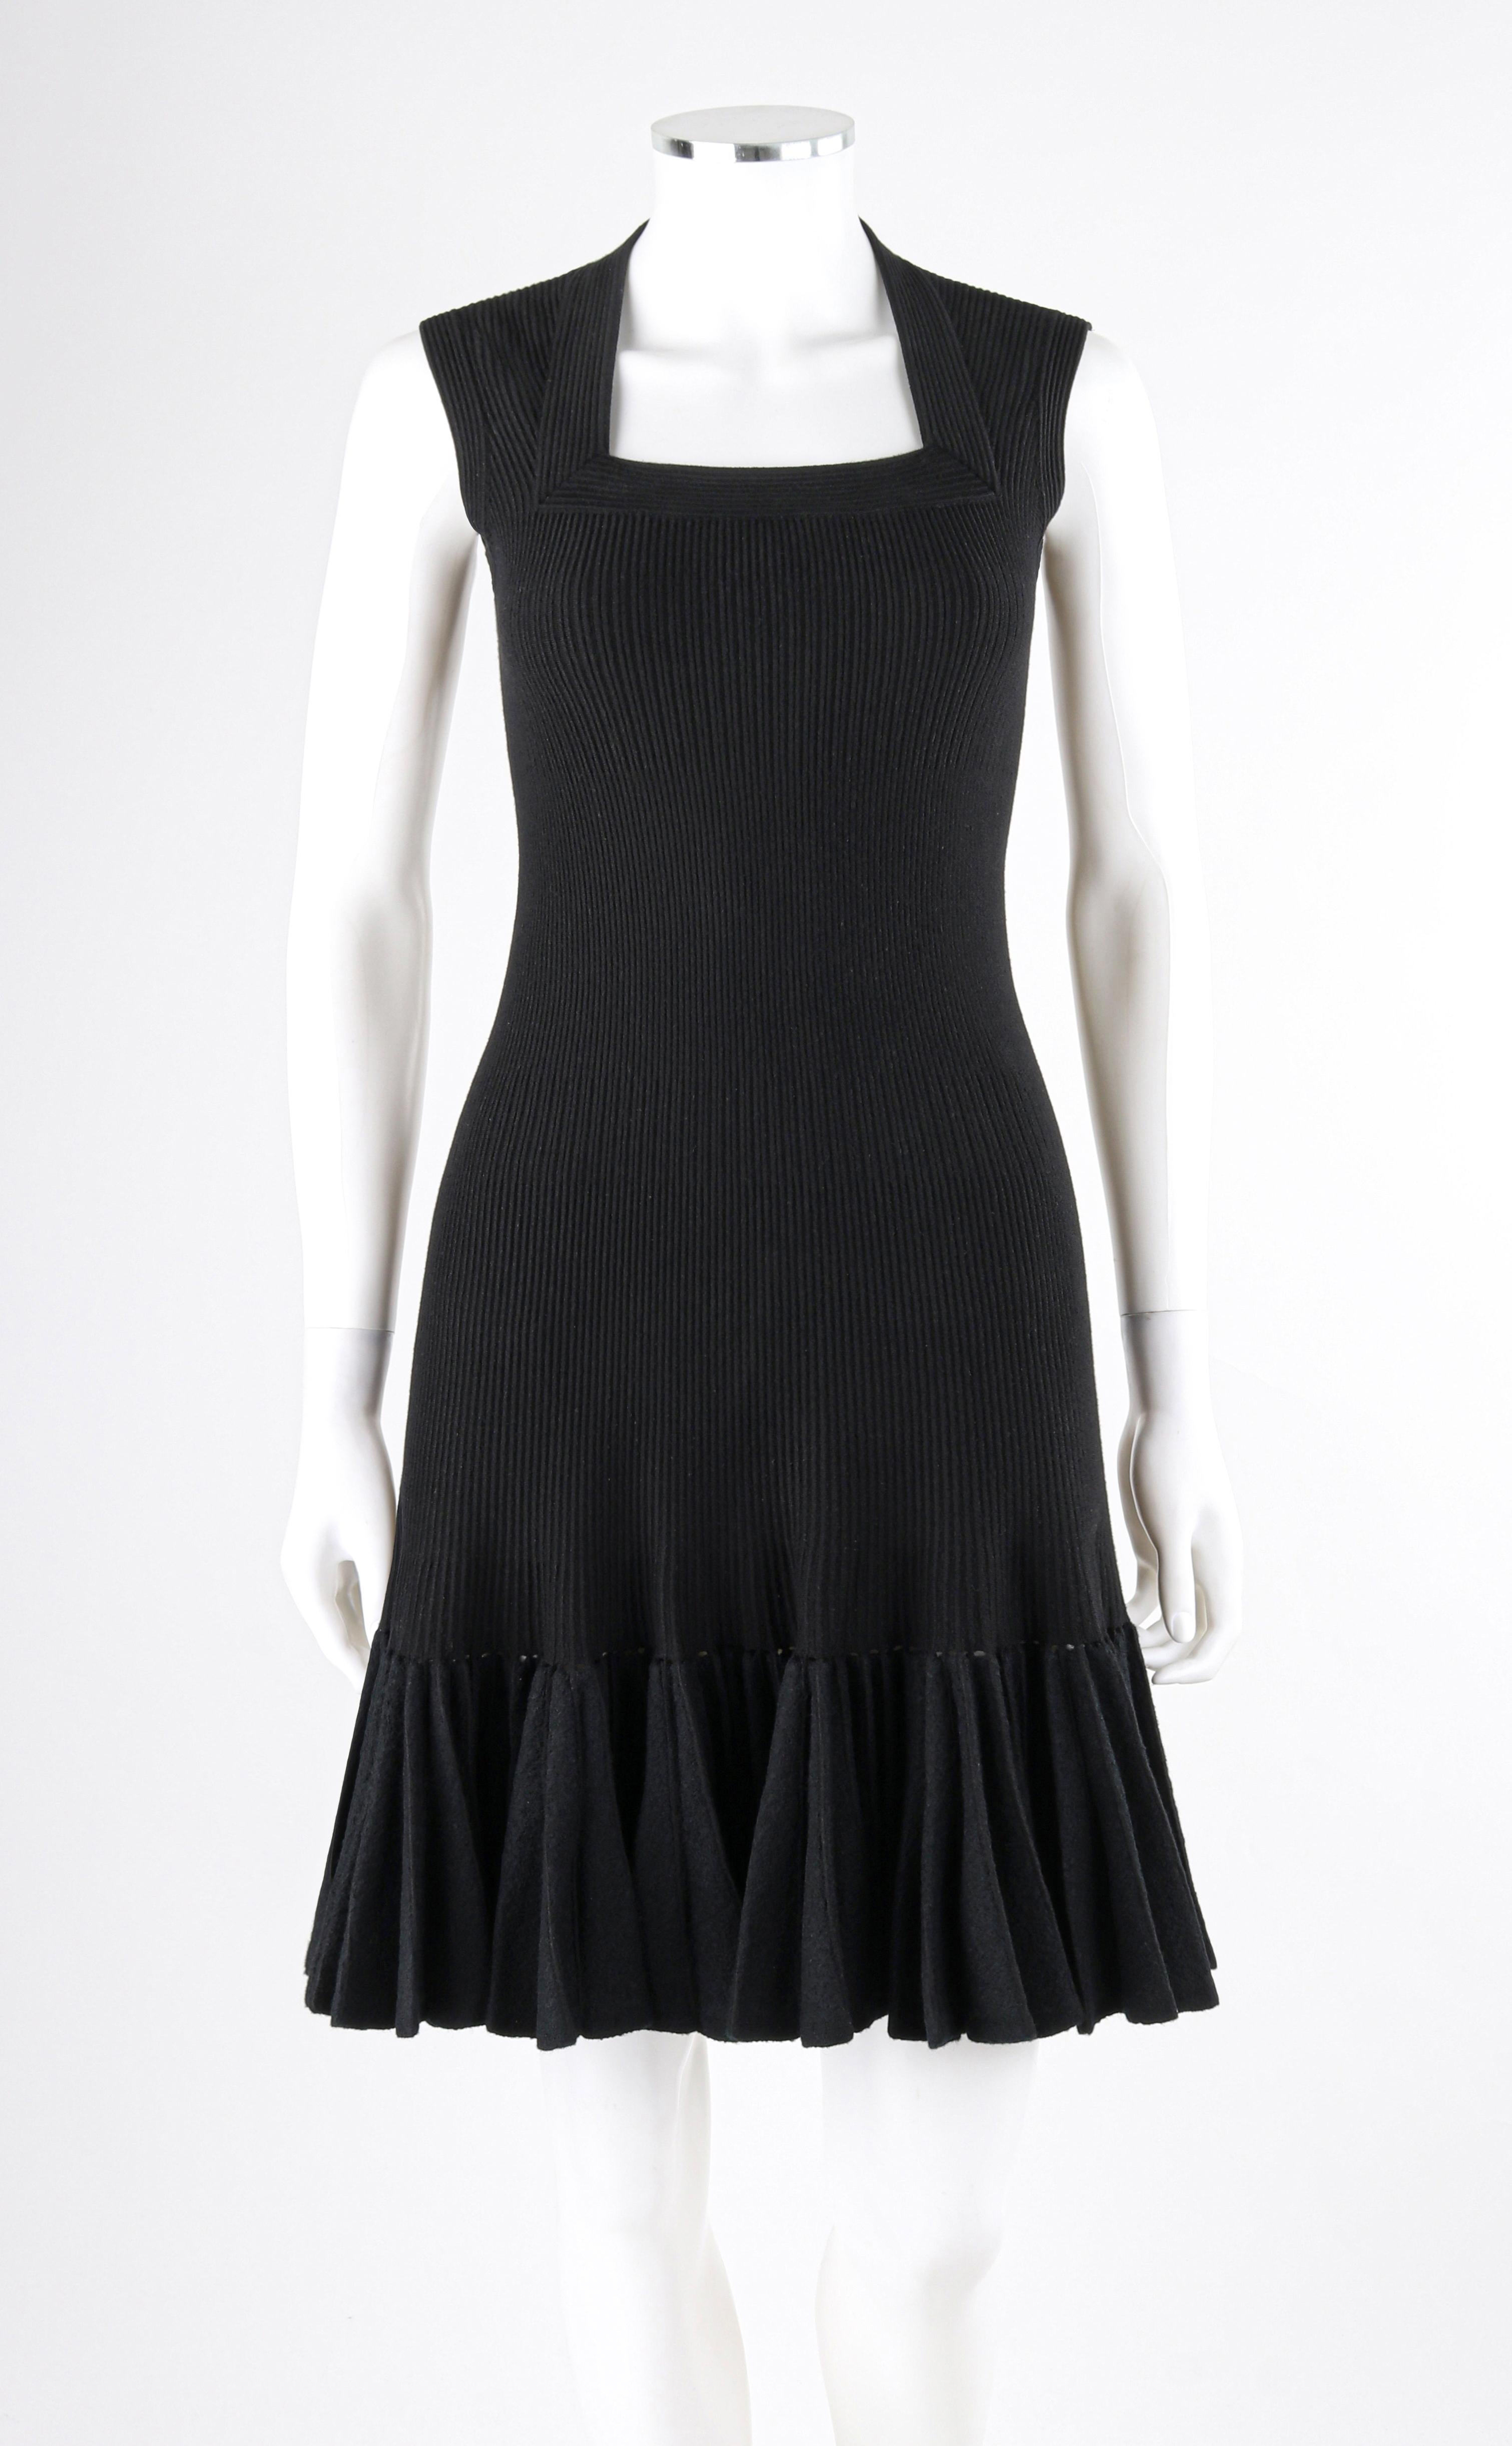 ALAIA Paris c.2010 Black Wool Ribbed Knit Pleated Hem Fit & Flare Mini Dress

Brand / Manufacturer: Alaia Paris
Circa: 2010
Designer: Azzedine Alaia
Style: Fit & Flare
Color(s): Black
Lined: No
Marked Fabric: 90% Lana Wool, 8% Polyester, 2%